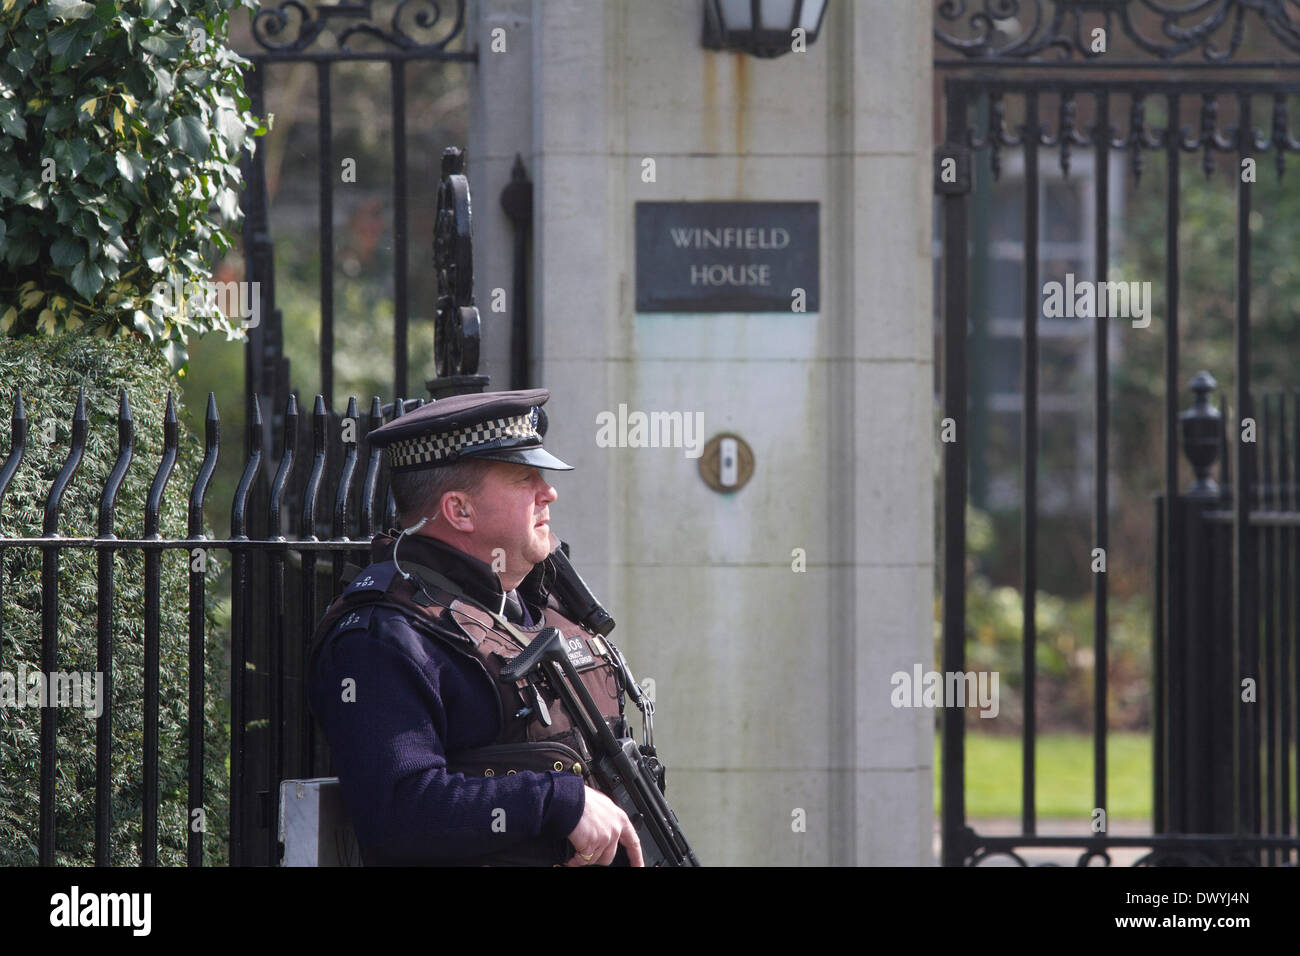 London UK. 14th March 2014. Police provide security outside the  American Ambassador residence in London as  US Secretary of State John Kerry was meeting his Russian counterpart foreign minister Sergei Lavrov in London to discuss the Ukranian crisis and the referendum in Crimea Stock Photo